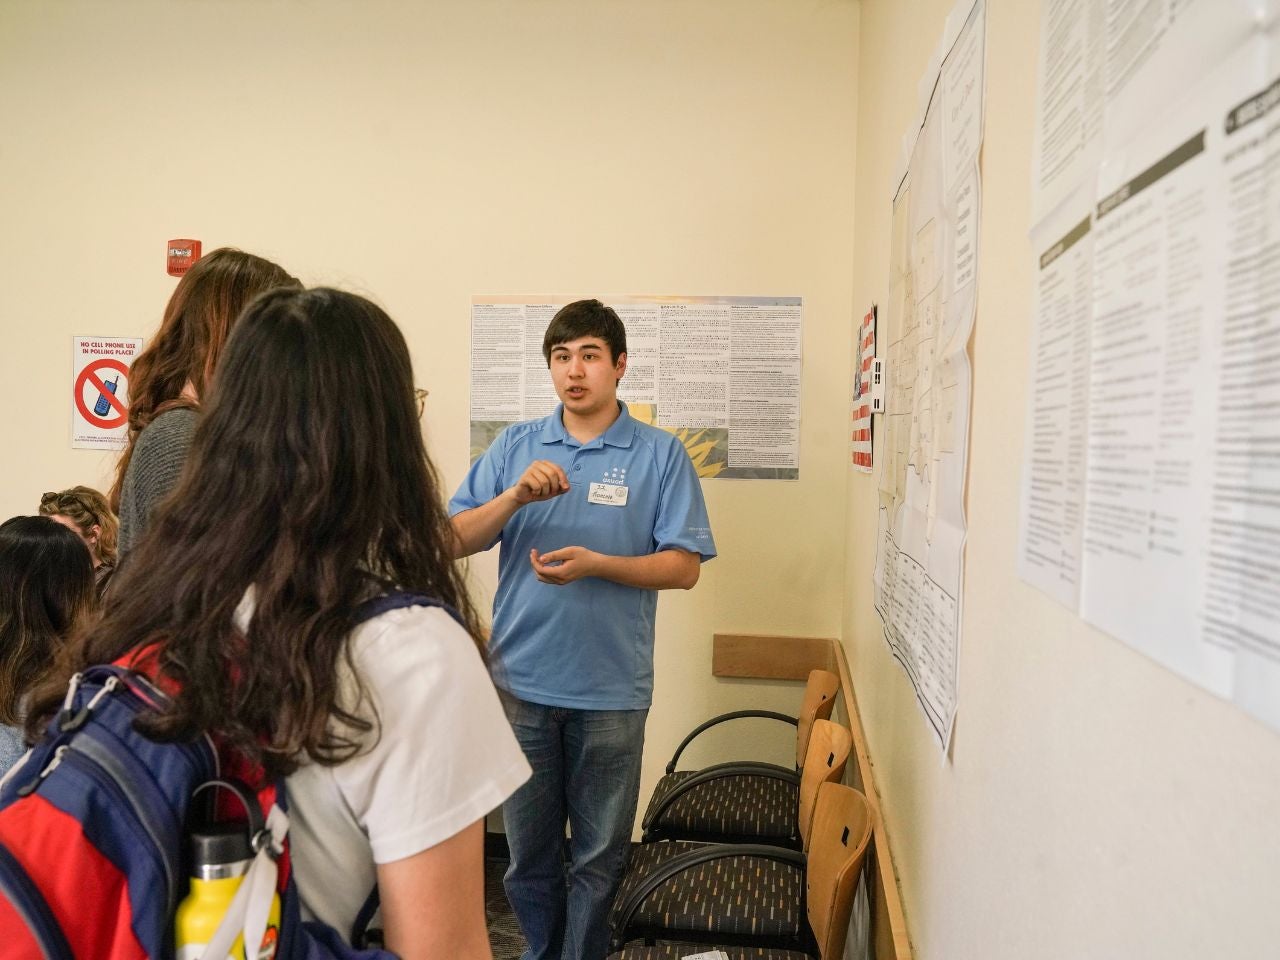 UC Davis political science major Francois Kaepellin stands in front of a wall covered in informational posters, speaking seriously to a pair of students.